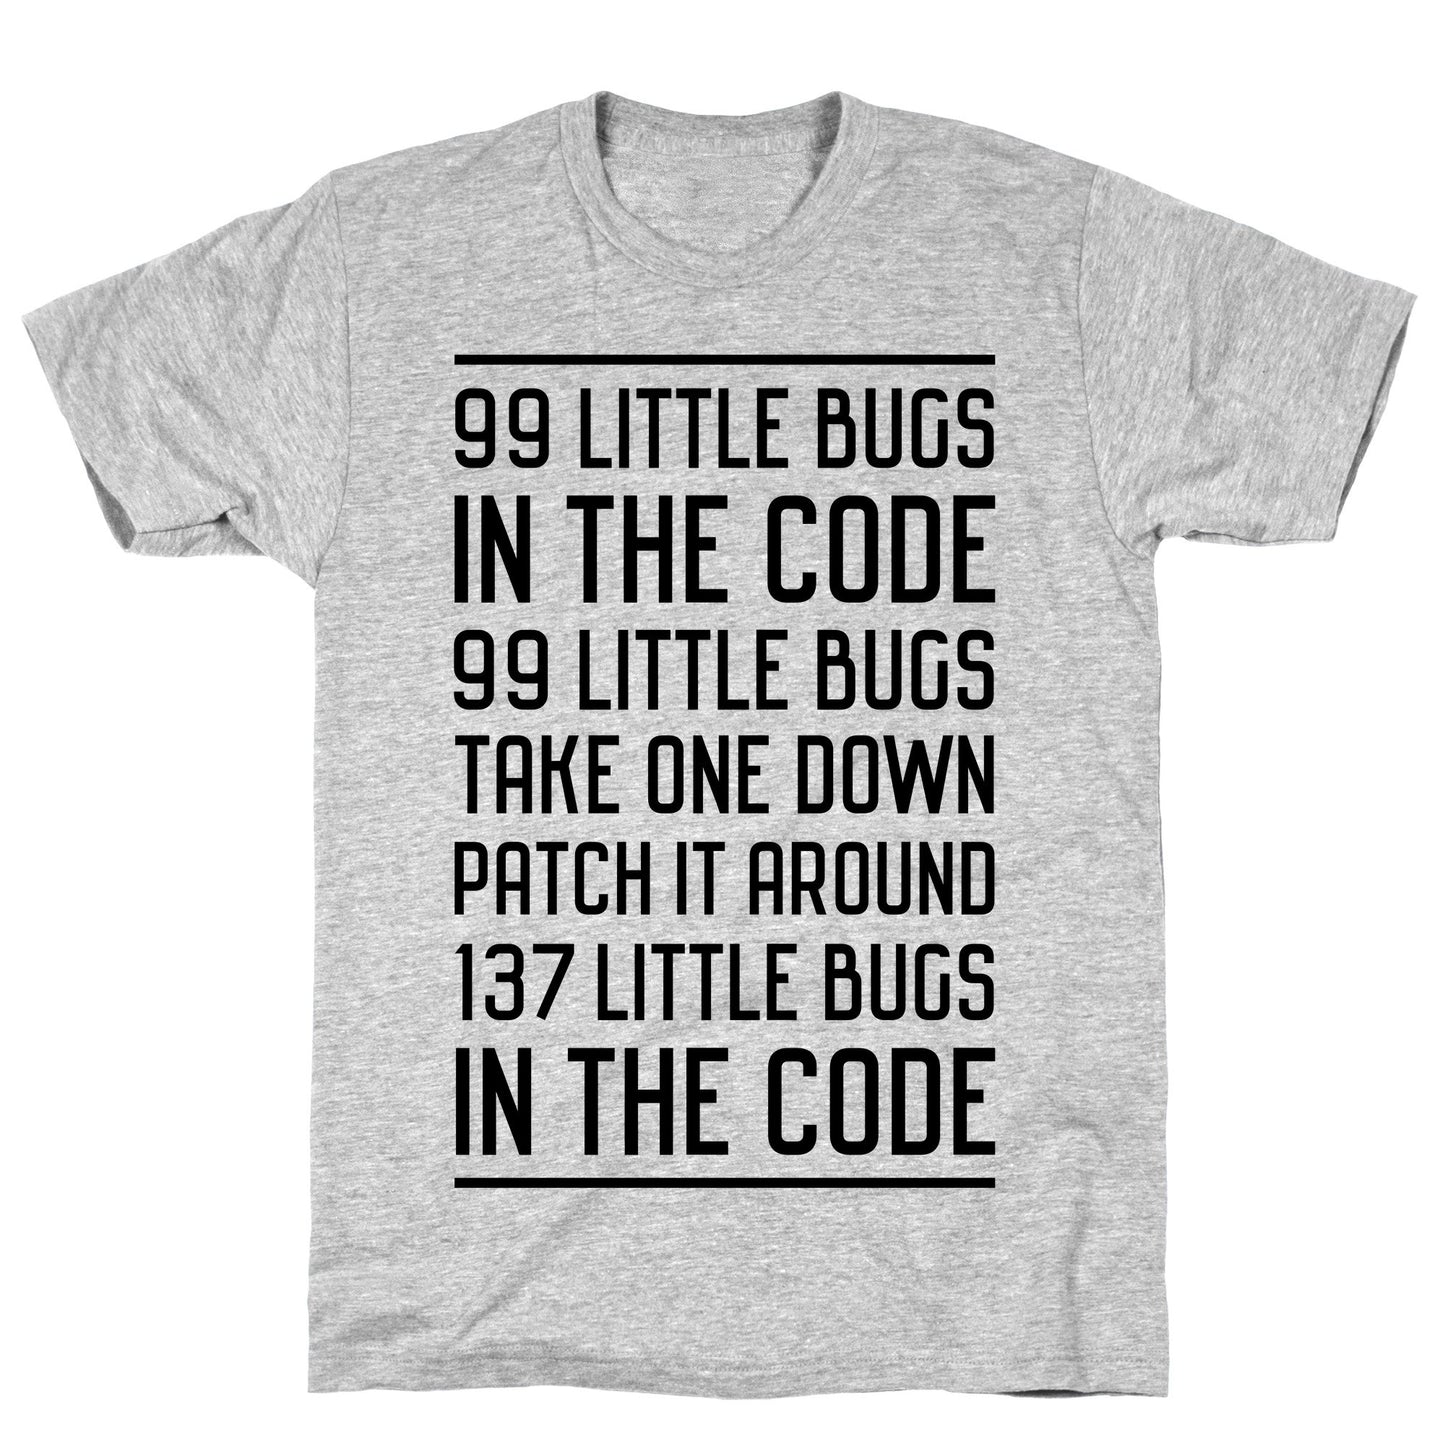 99 Little Bugs in the Code Athletic Gray Unisex Cotton Tee